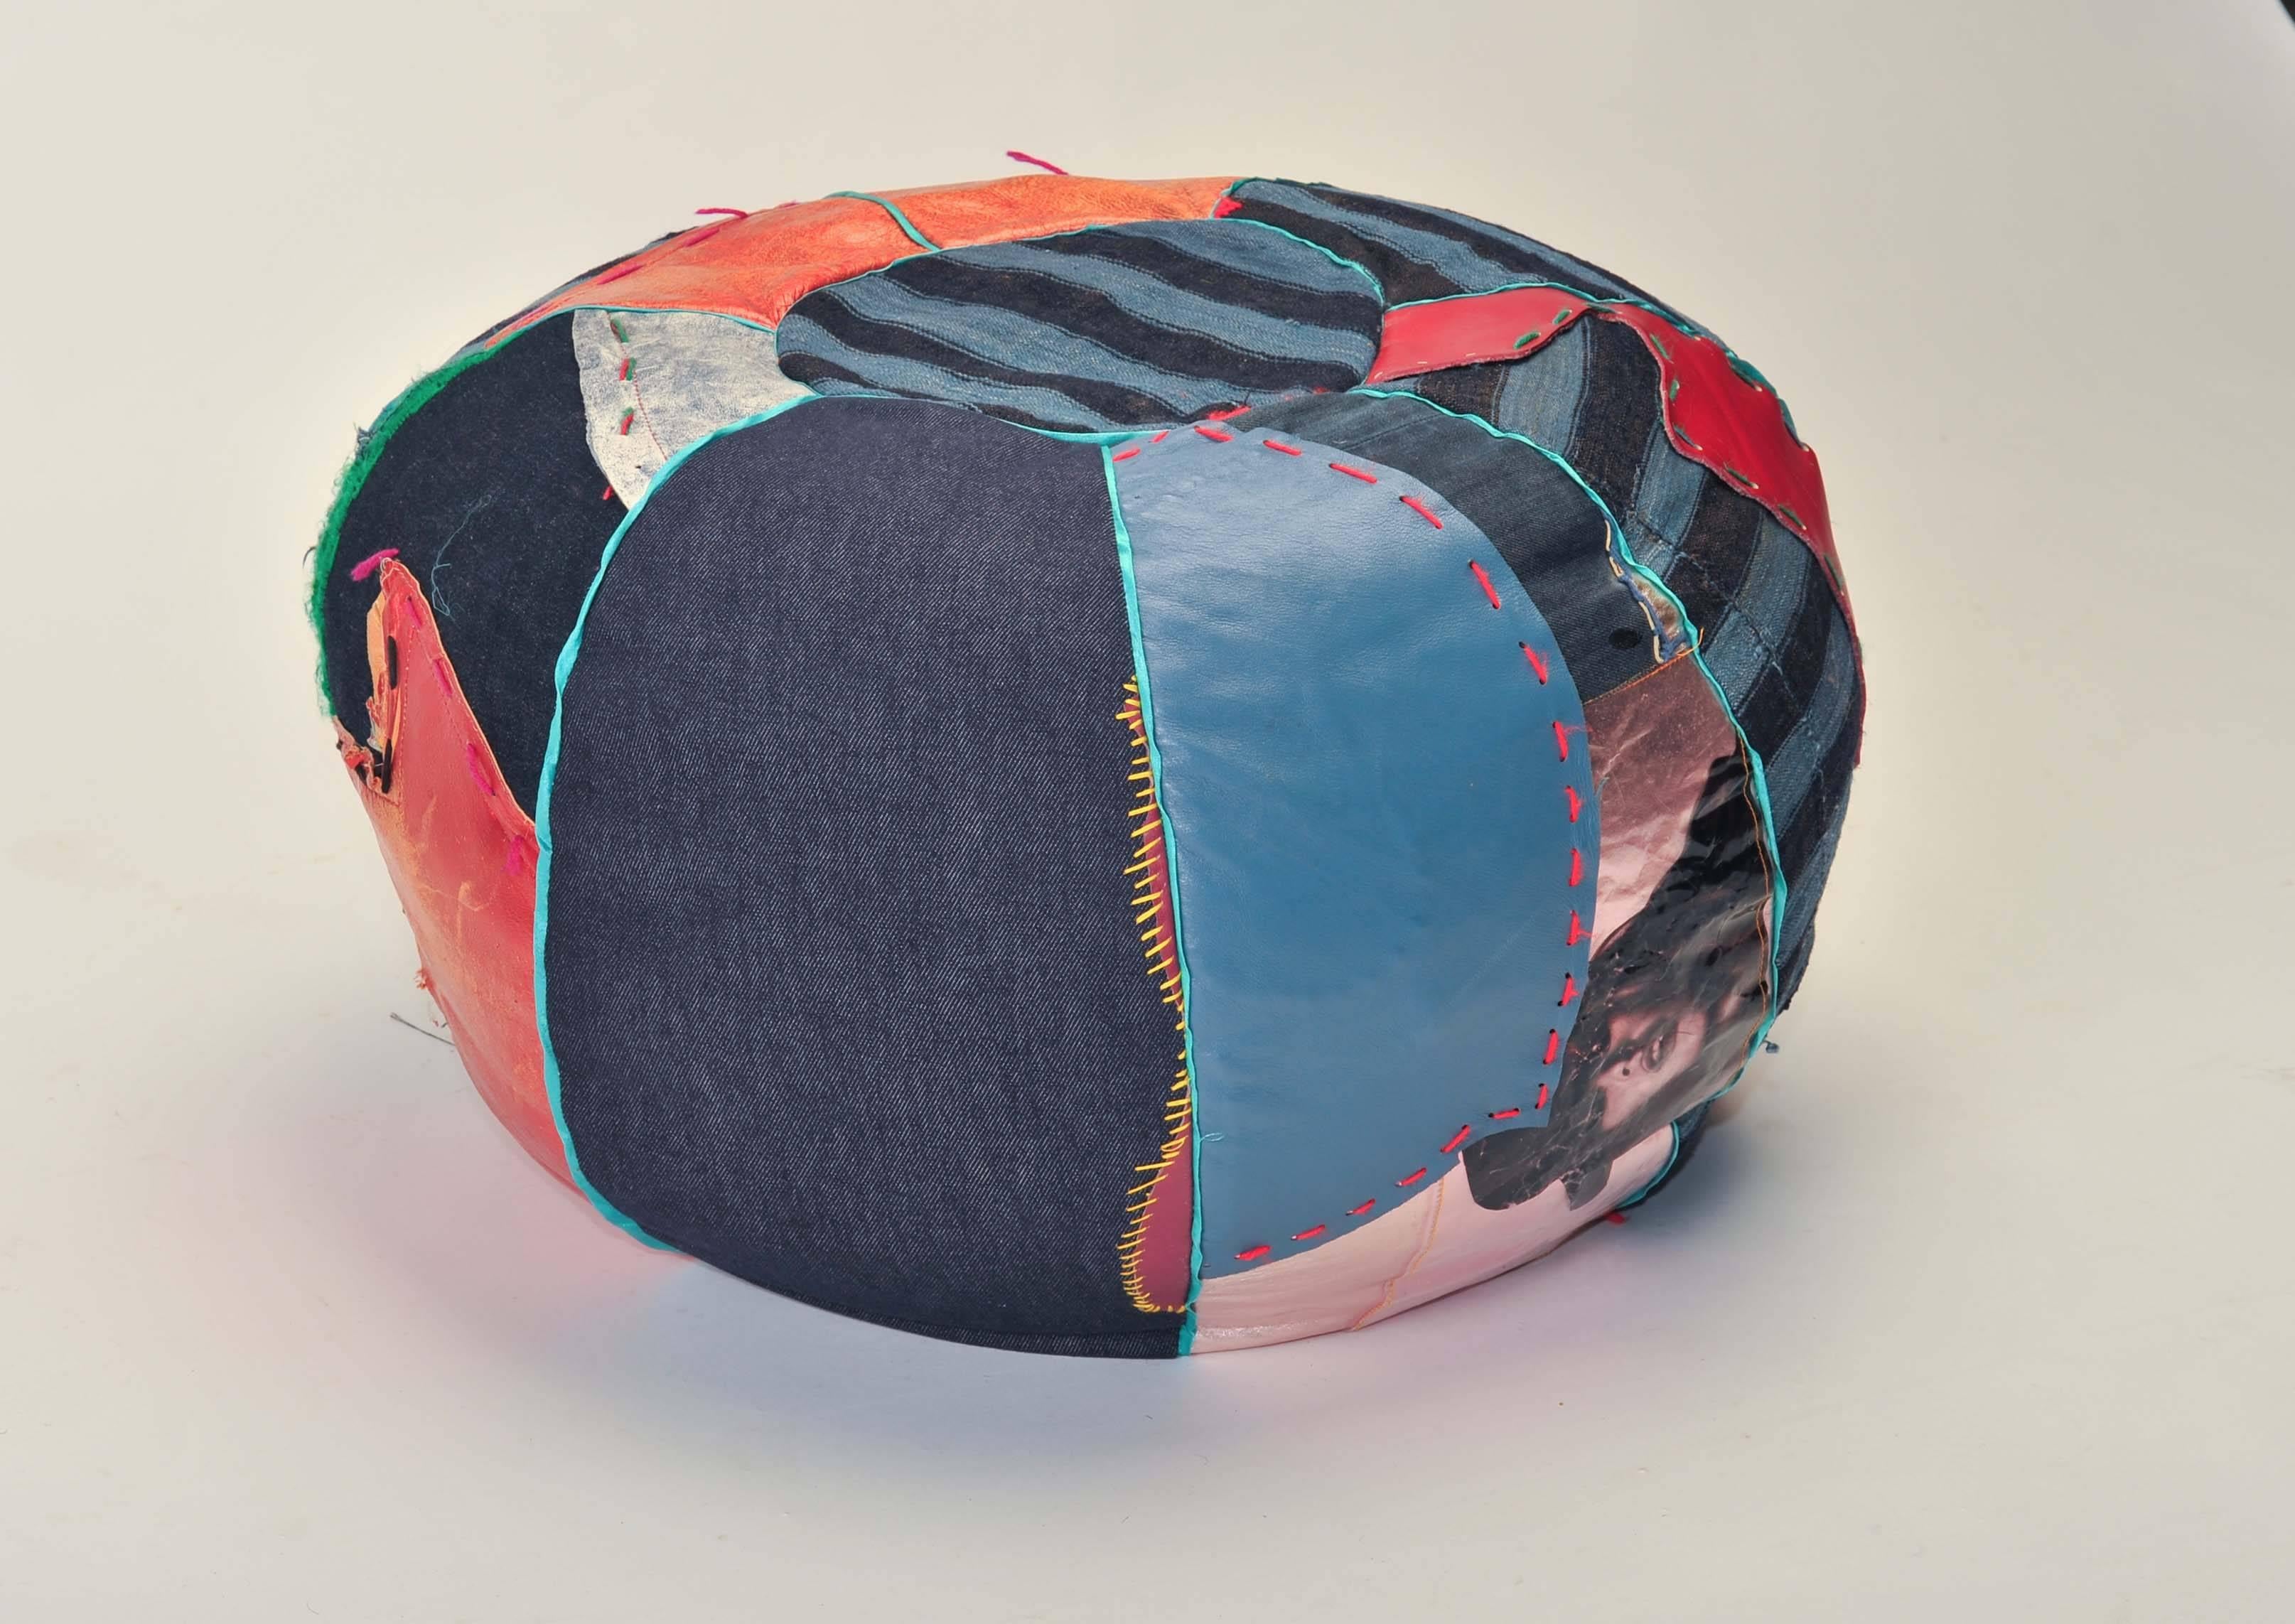 A unique handmade Bohemian/Rock and Roll style ottoman/pouffe/floor cushion. Made out from customised 1960s1970s vintage jeans denim, leather, complemented with an early 19th-century Dutch funeral blanket and hand embroidery.

Made by Joelle